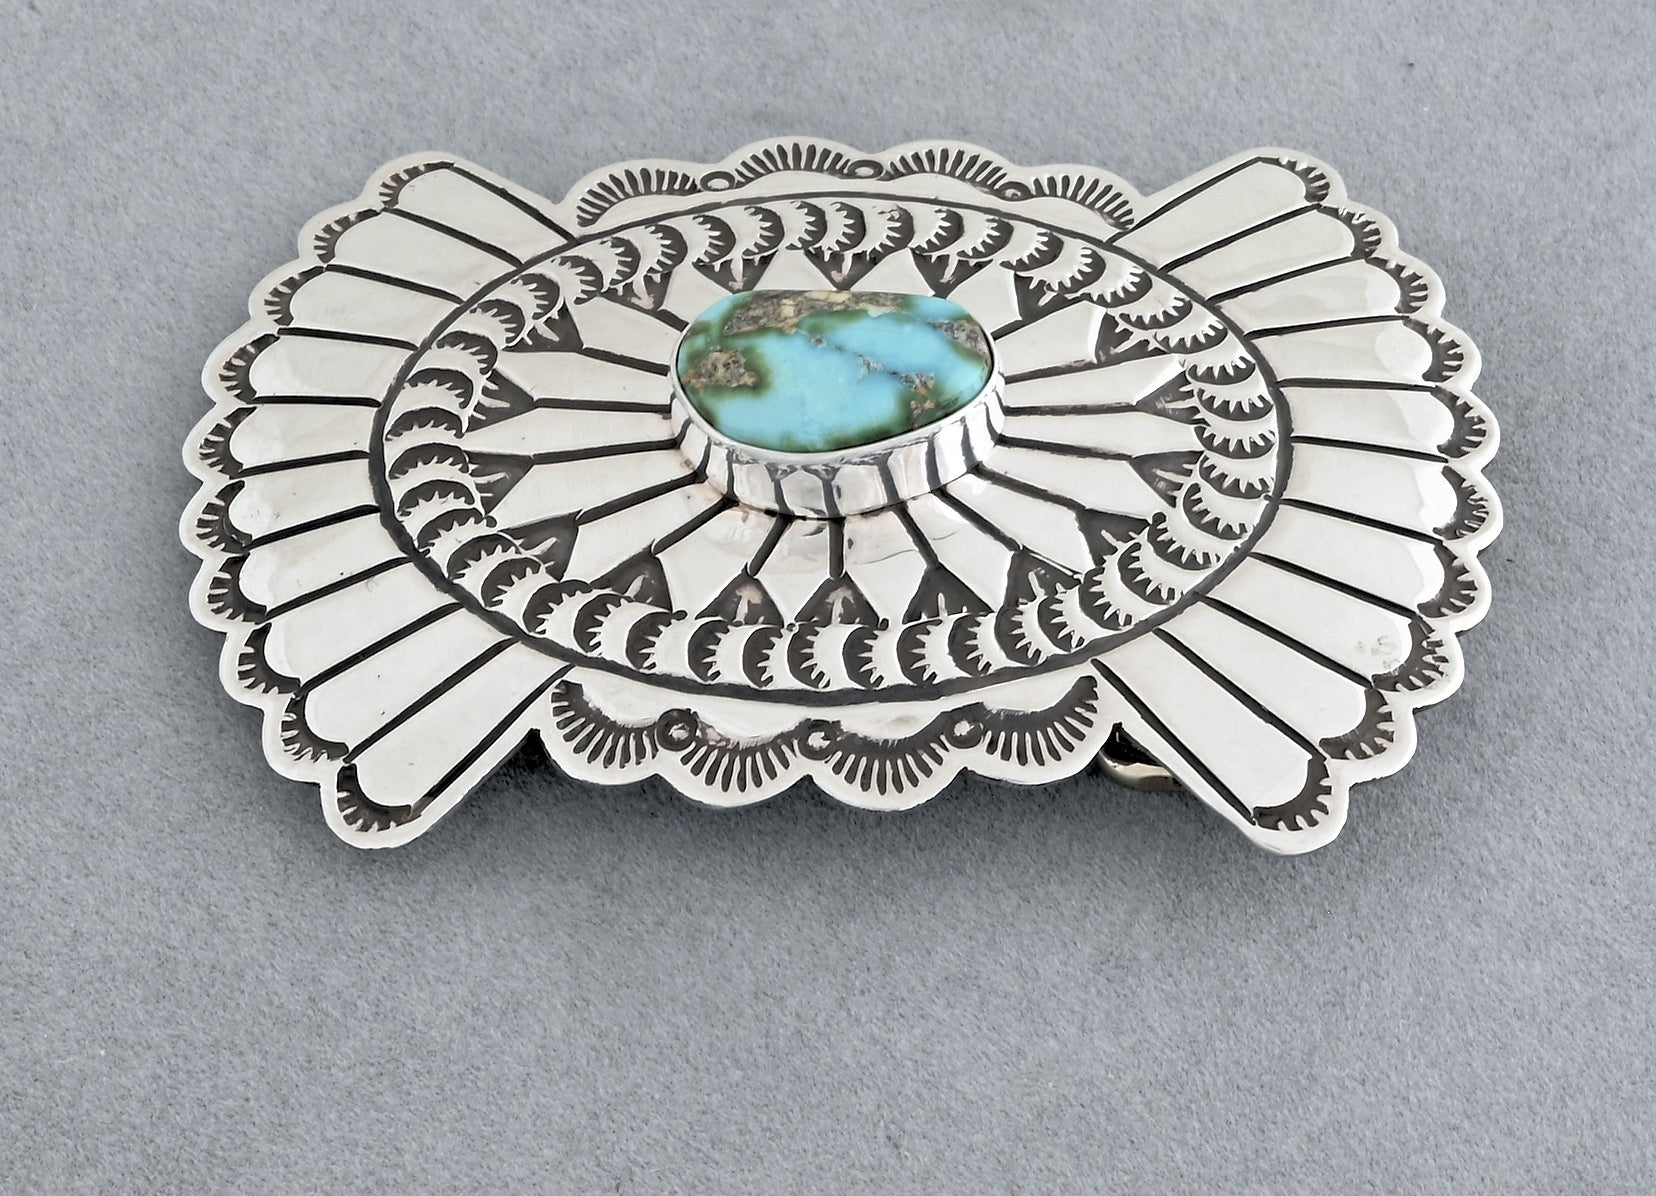 Belt Buckle with Golden Hills Turquoise by Delbert Delgarito